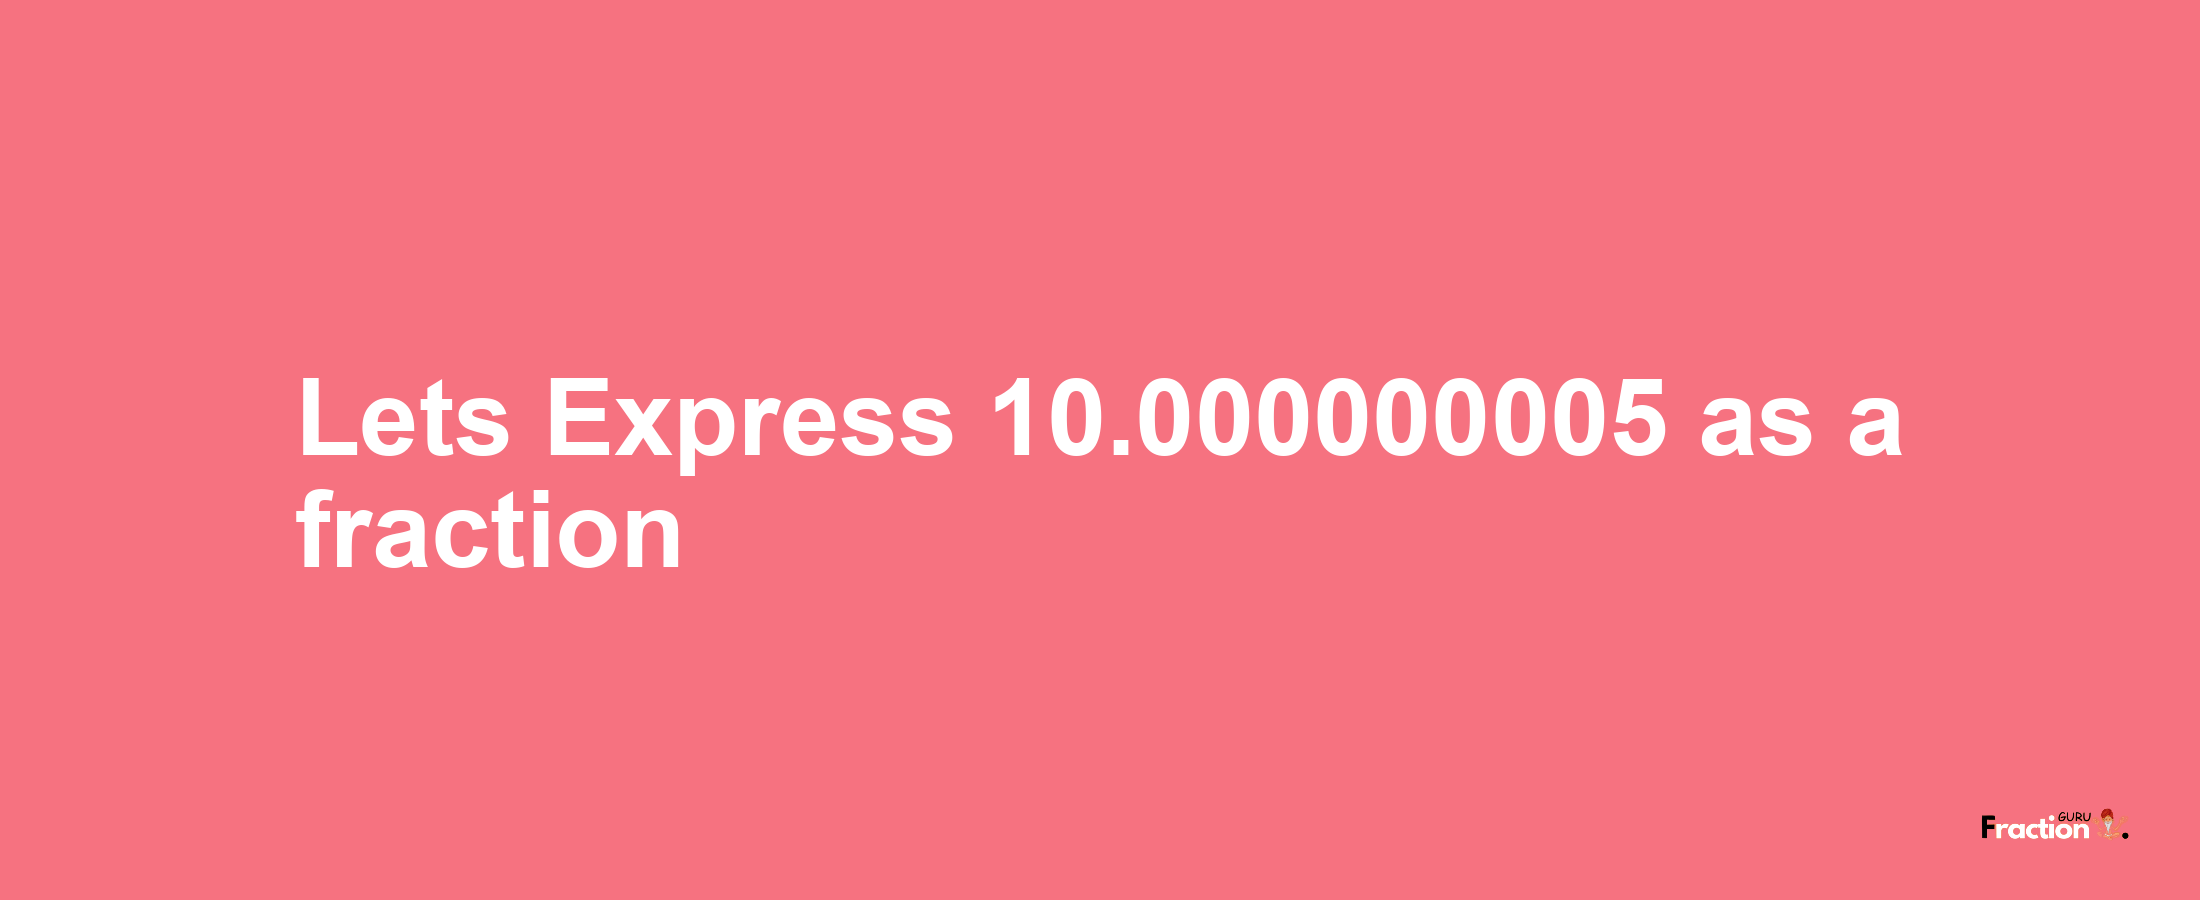 Lets Express 10.000000005 as afraction